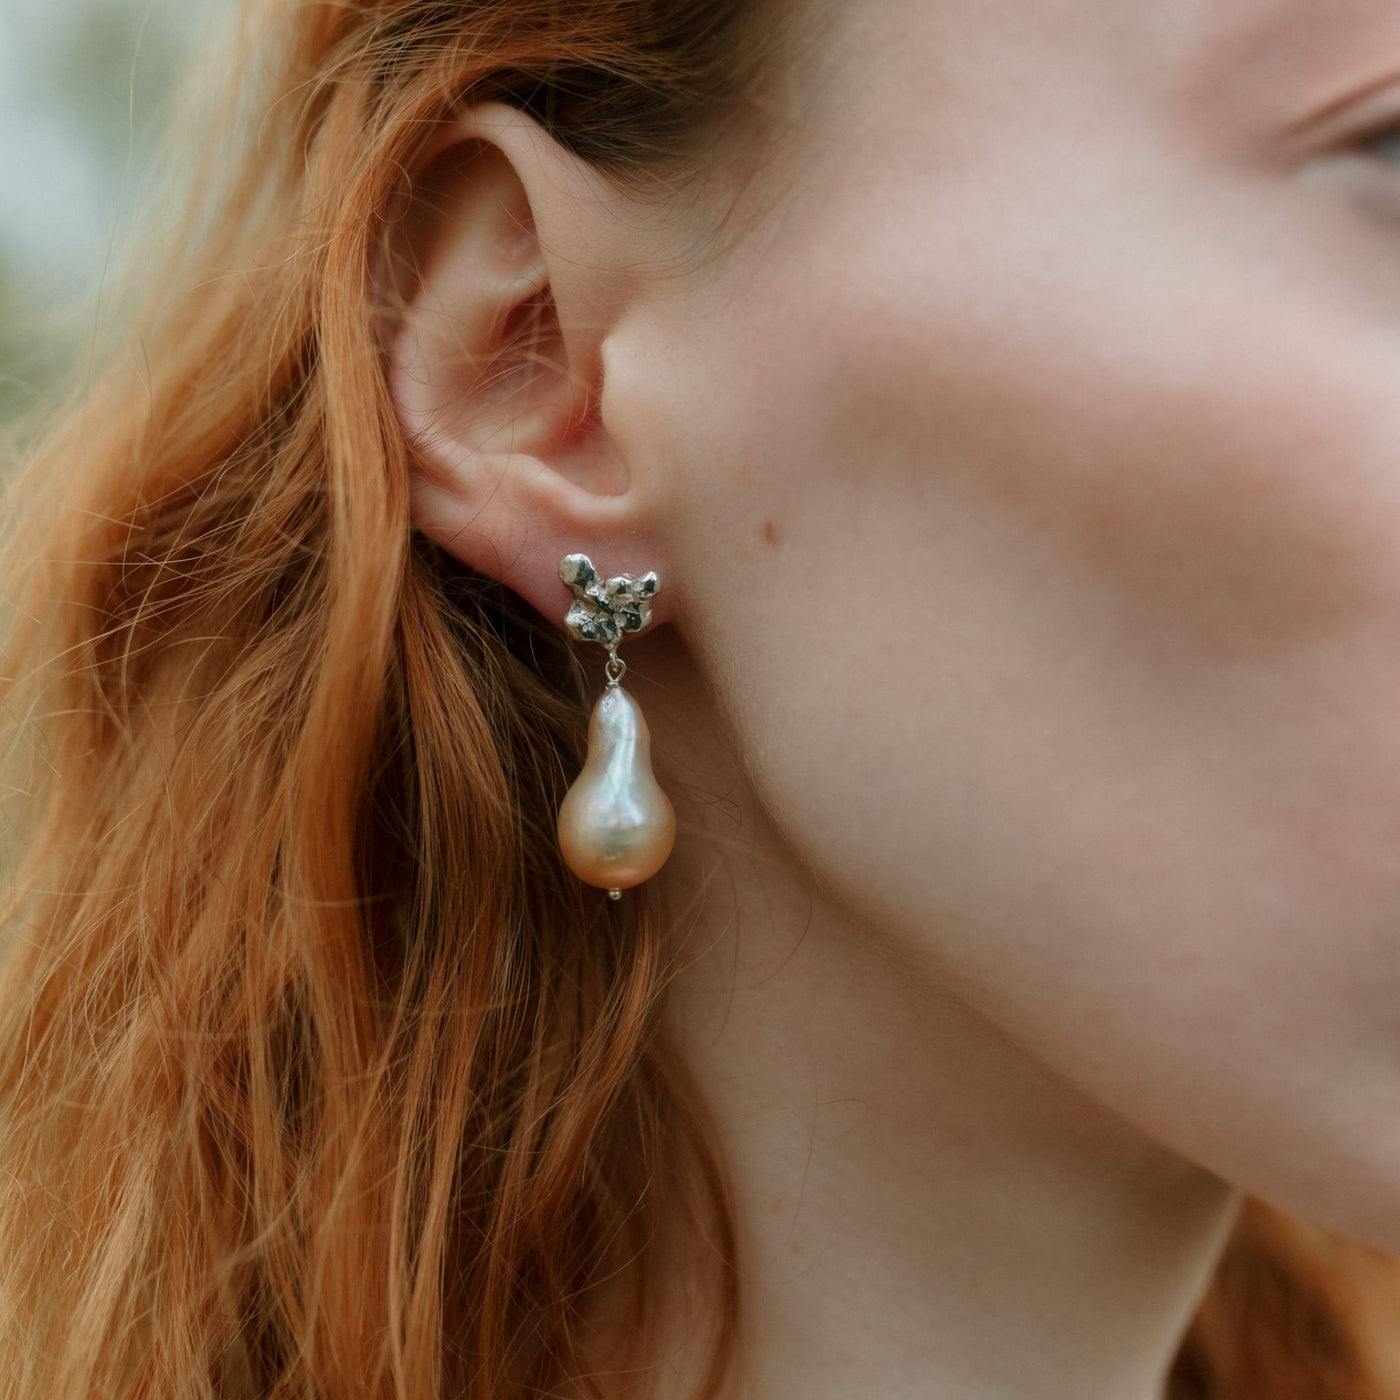 MARIENLUND // Fine silver earrings with peach-colored baroque Fireball pearls